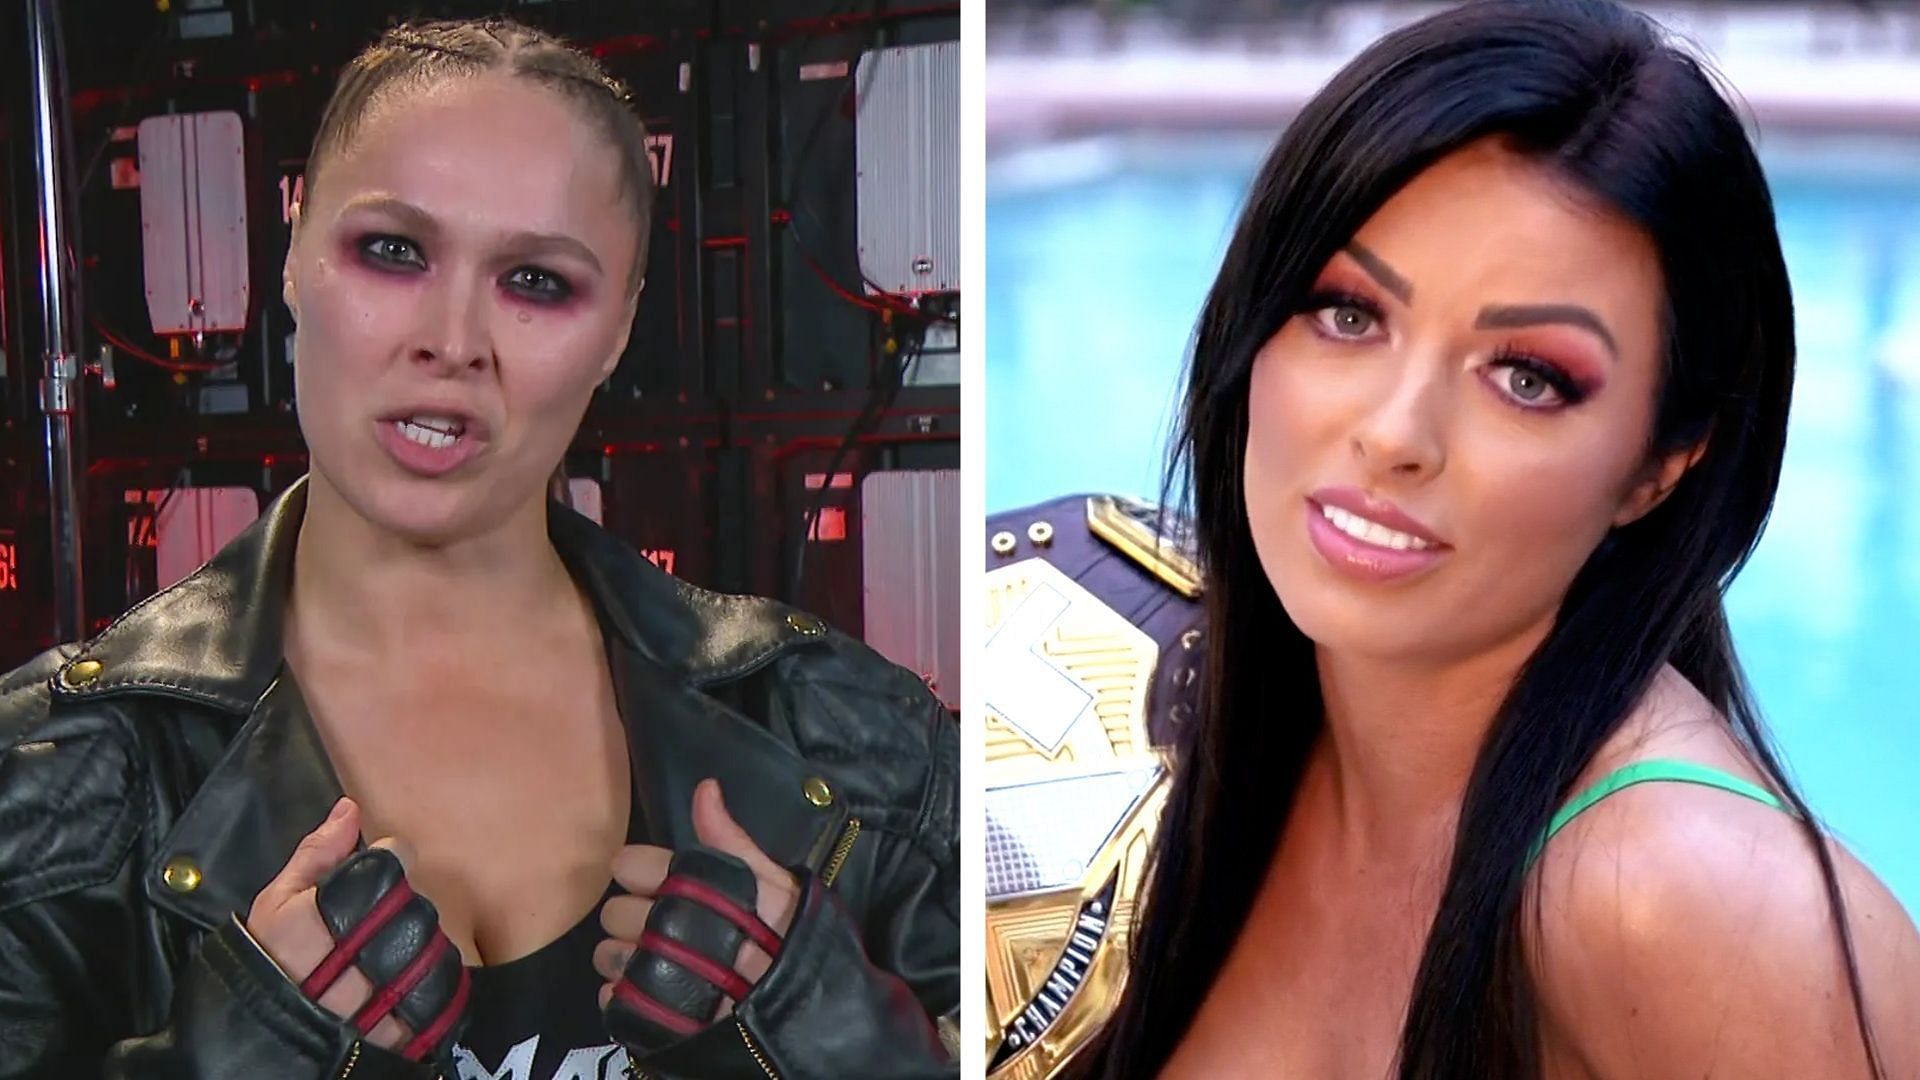 Ronda Rousey may be dethroned by a star of tomorrow from NXT